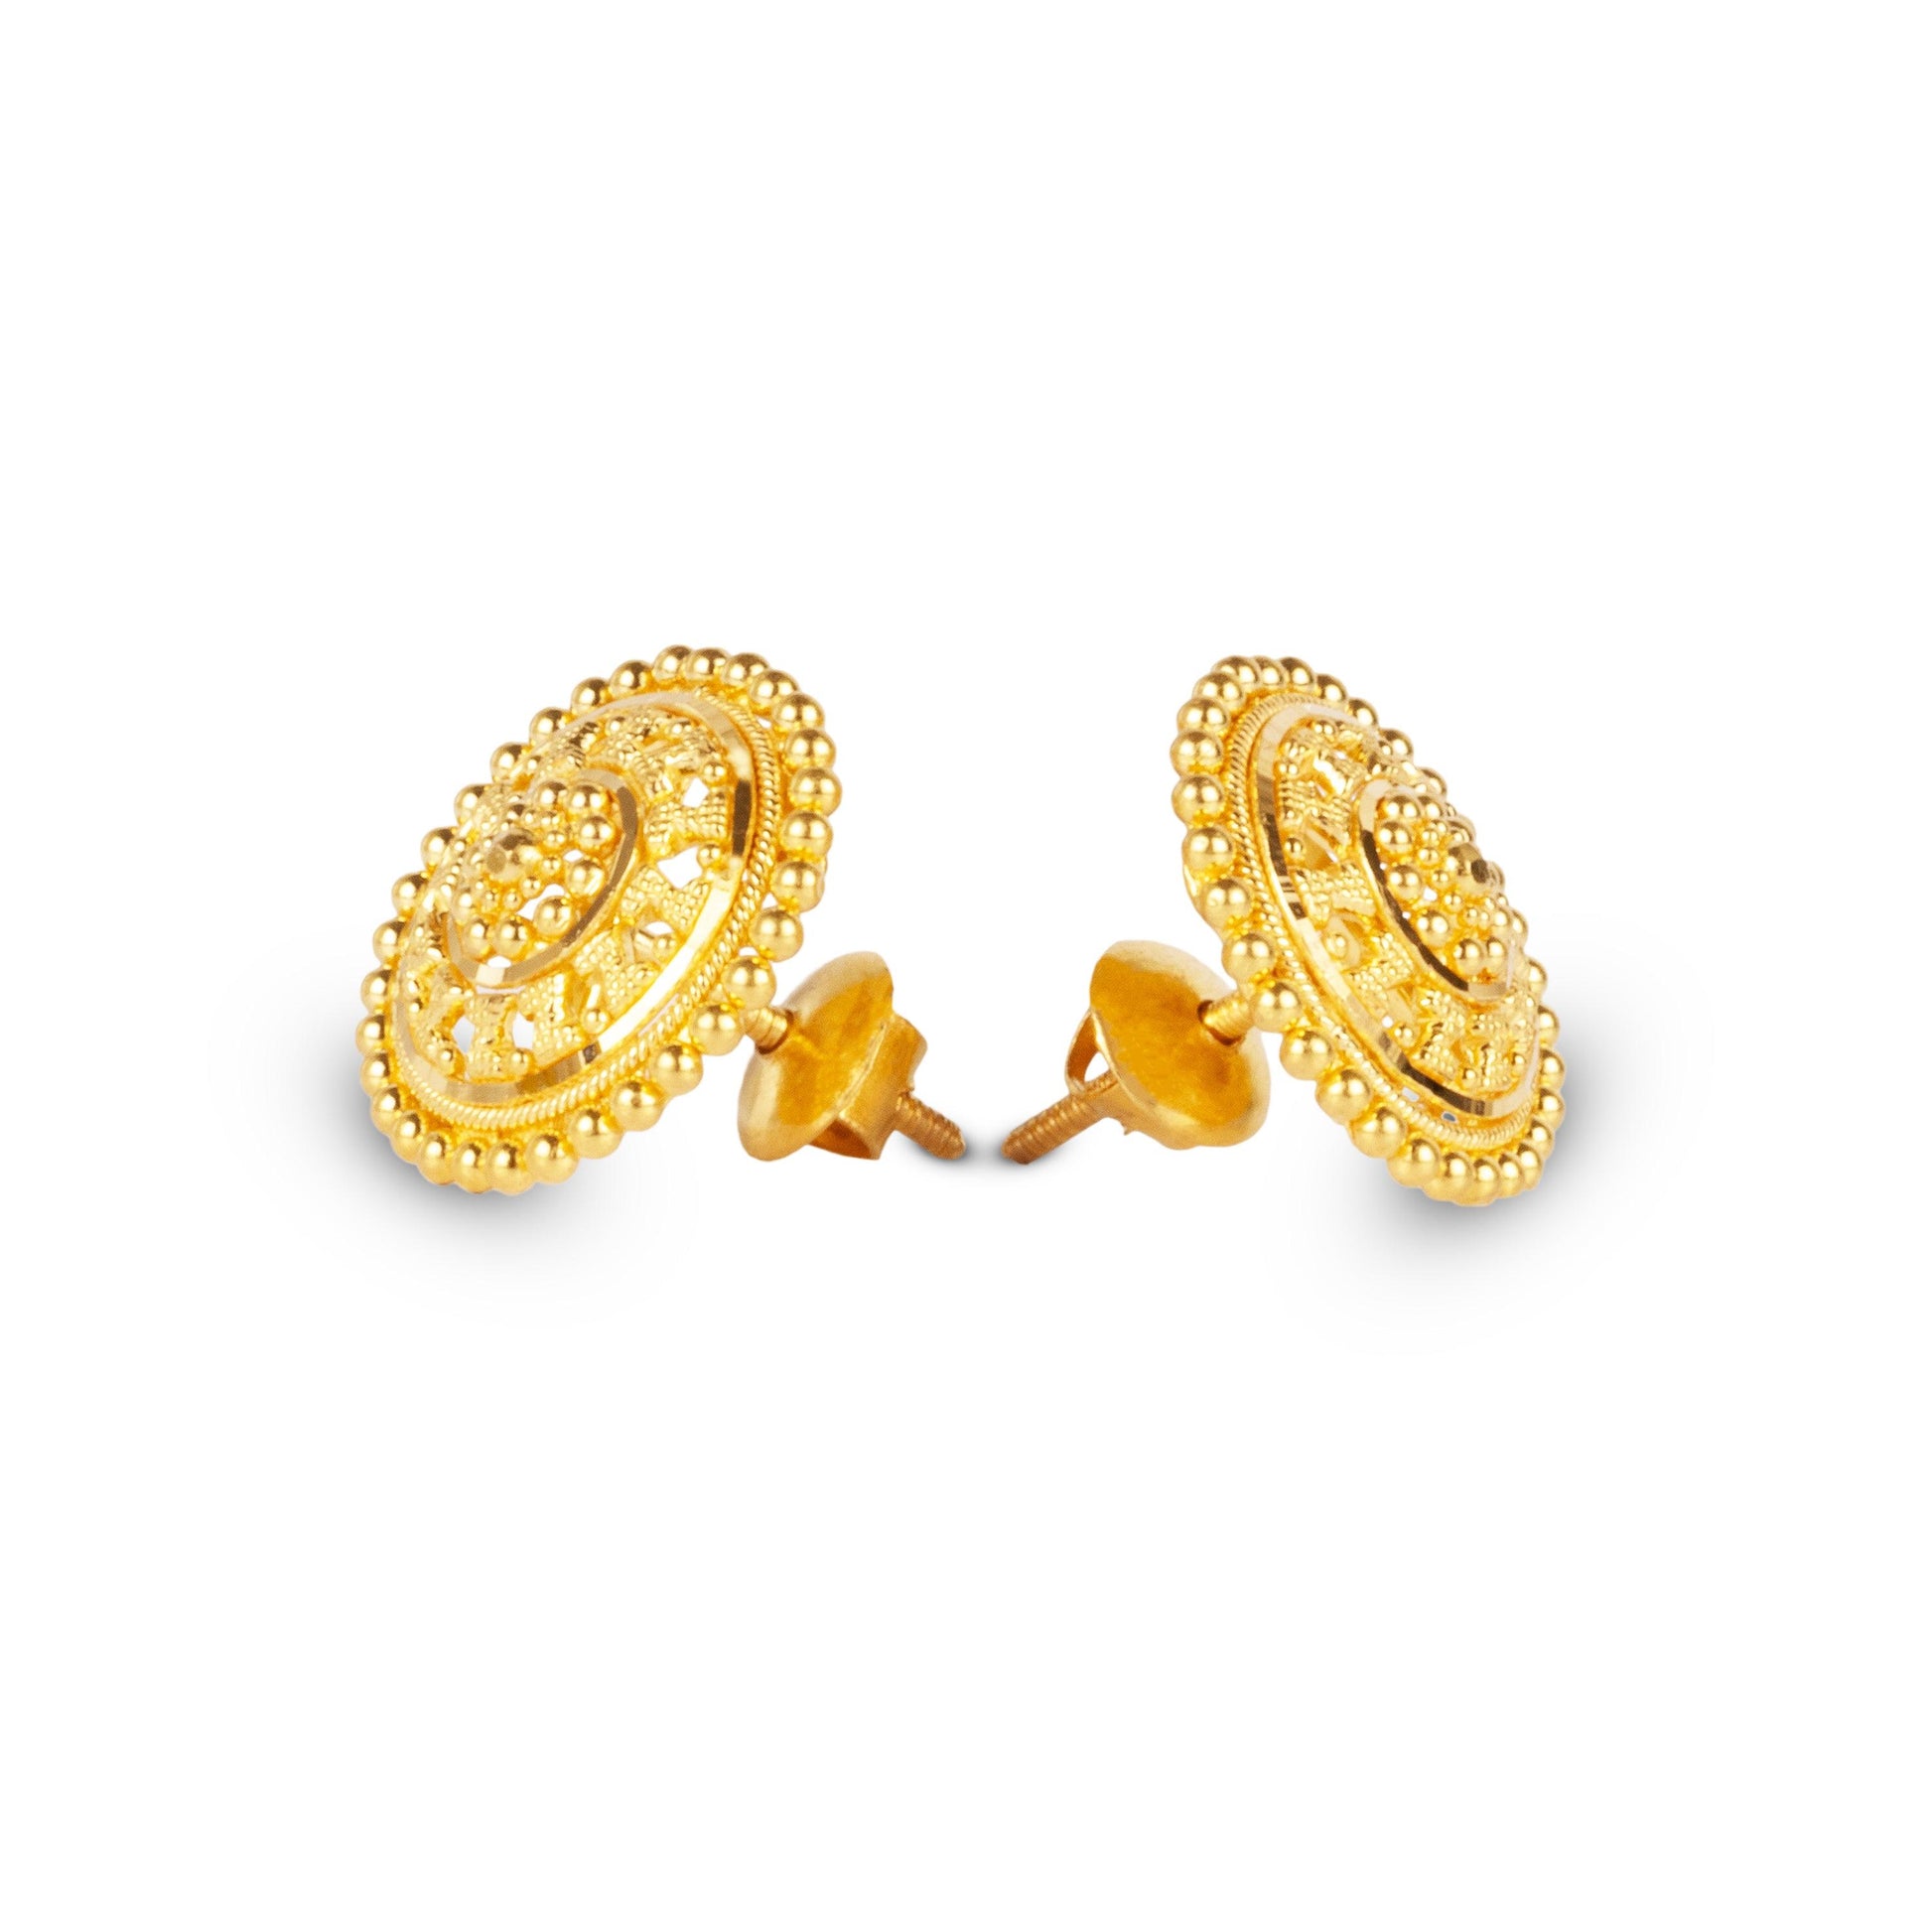 22ct Gold Earrings With Filigree Work Design E-7934 - Minar Jewellers